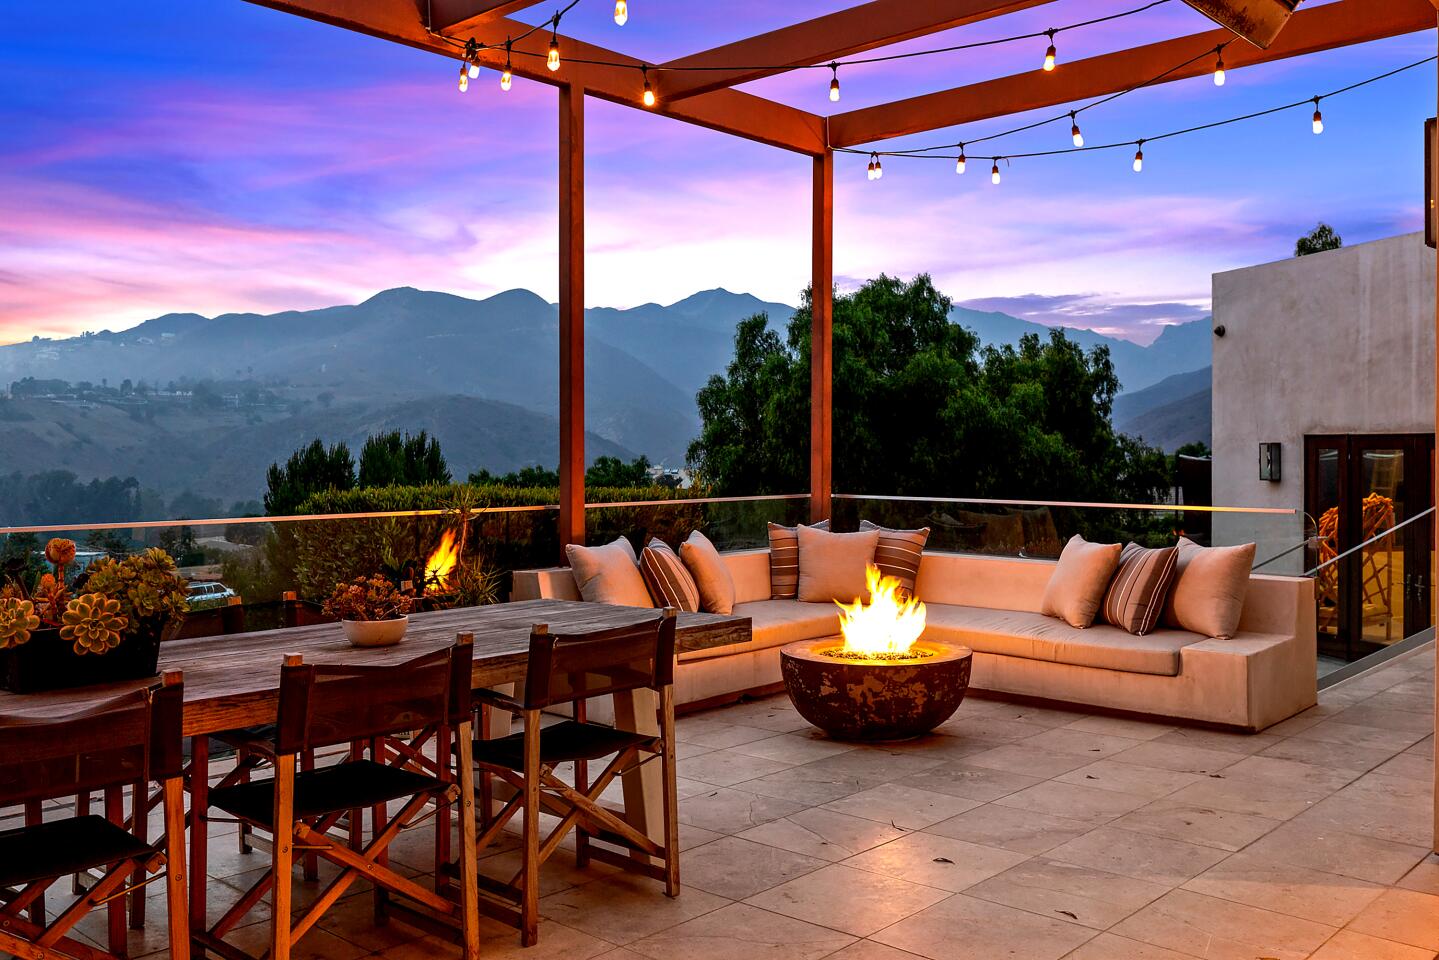 A view of the hills and landscaping from a furnished patio area.